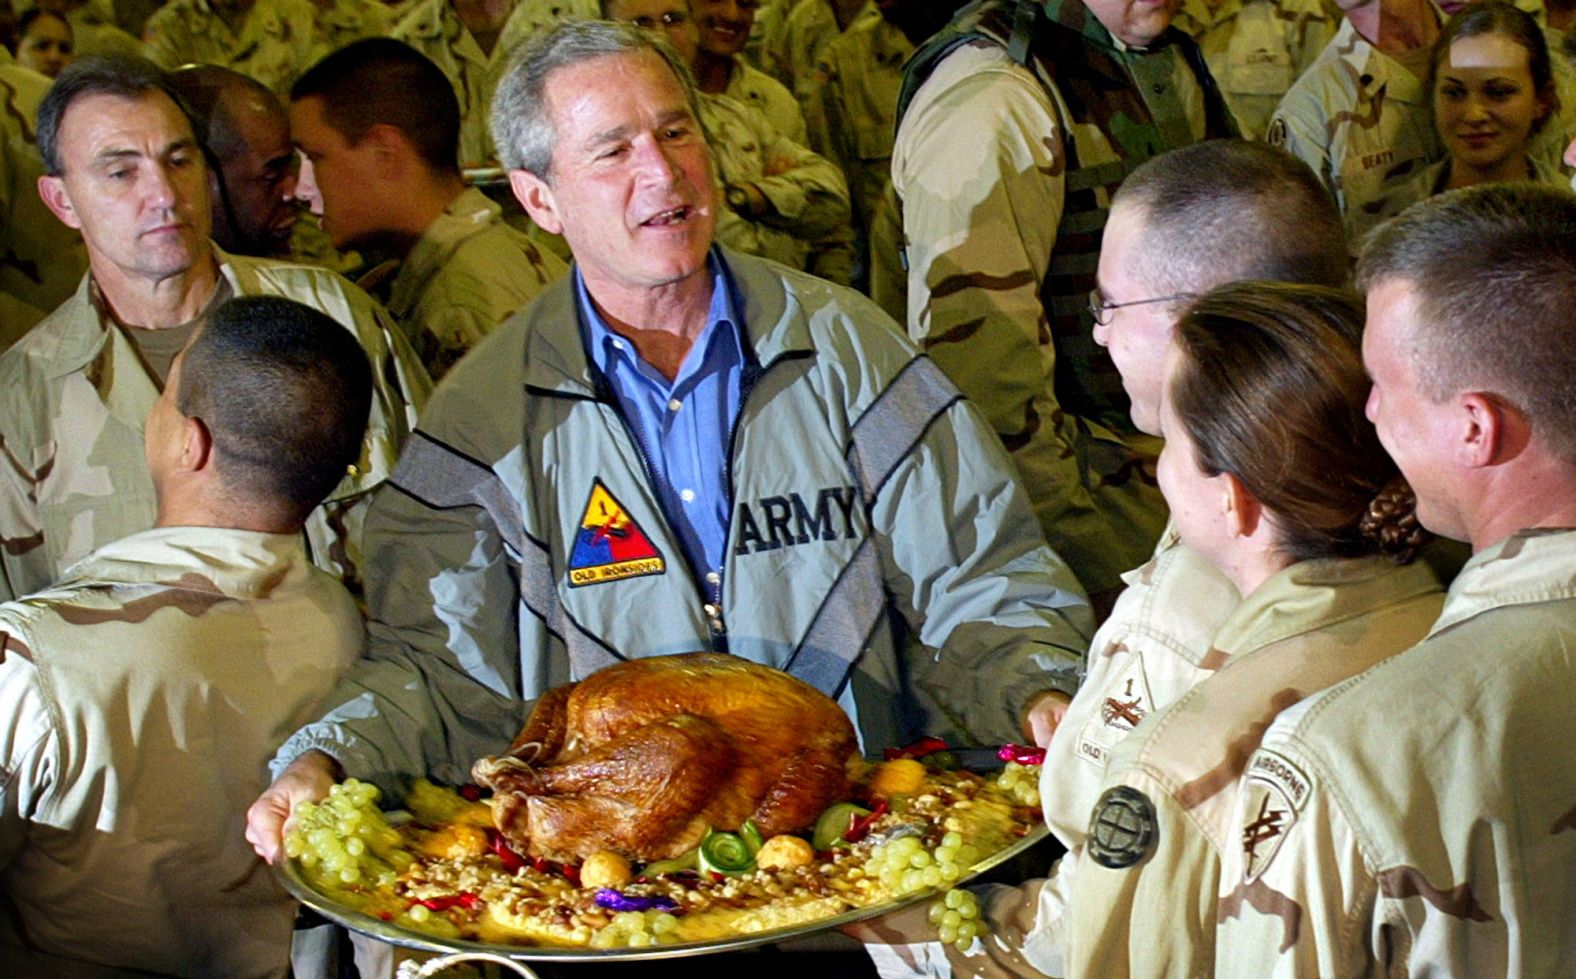 President George W. Bush holds a Thanksgiving turkey while visiting US troops stationed in Baghdad, Iraq, in November 2003. The Iraq War began in March of that year.